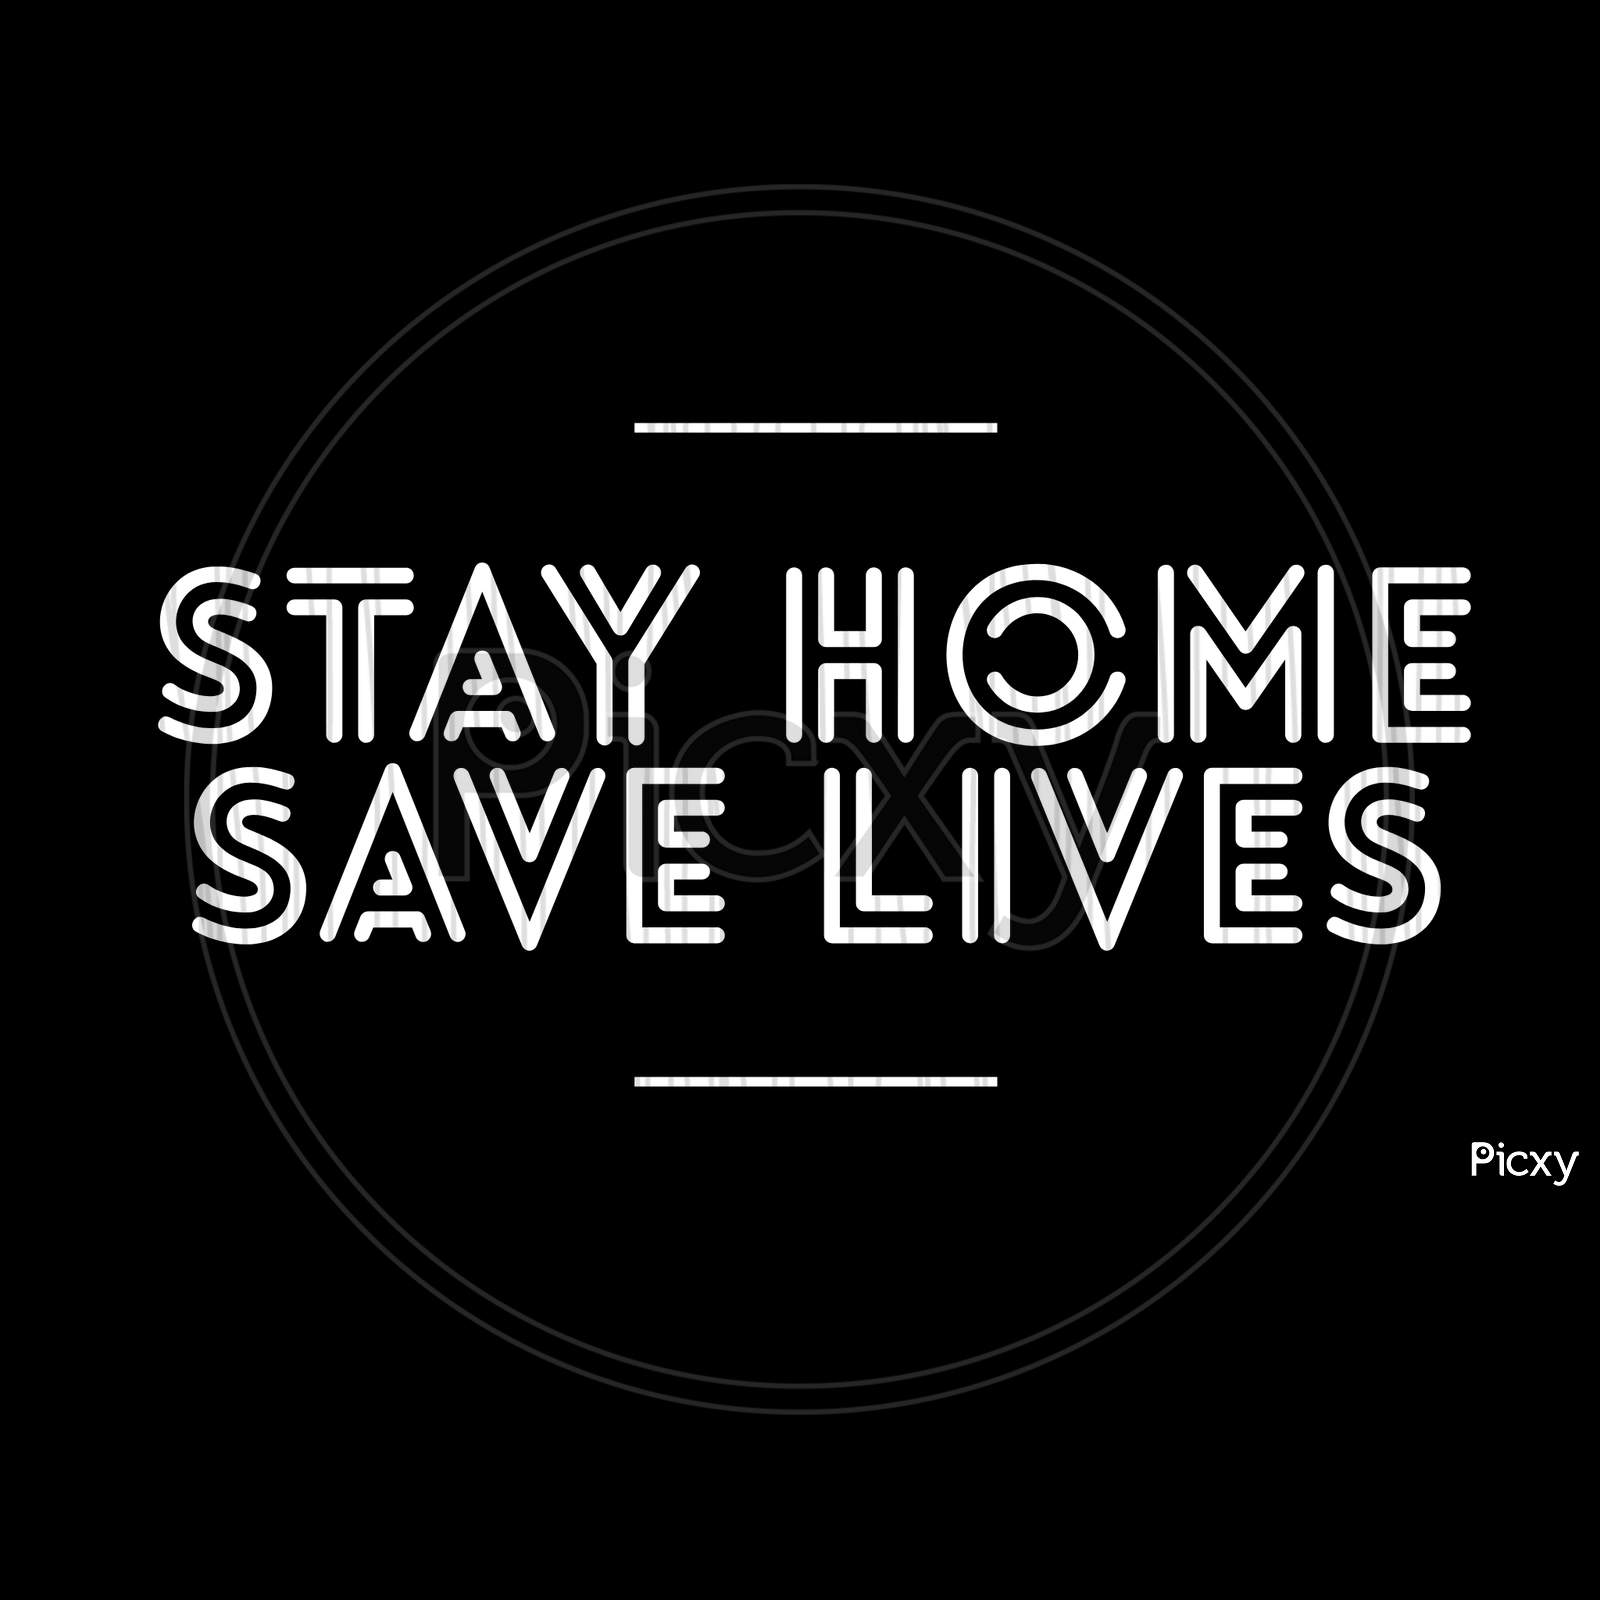 Image With Text "Stay Home Save Lives"